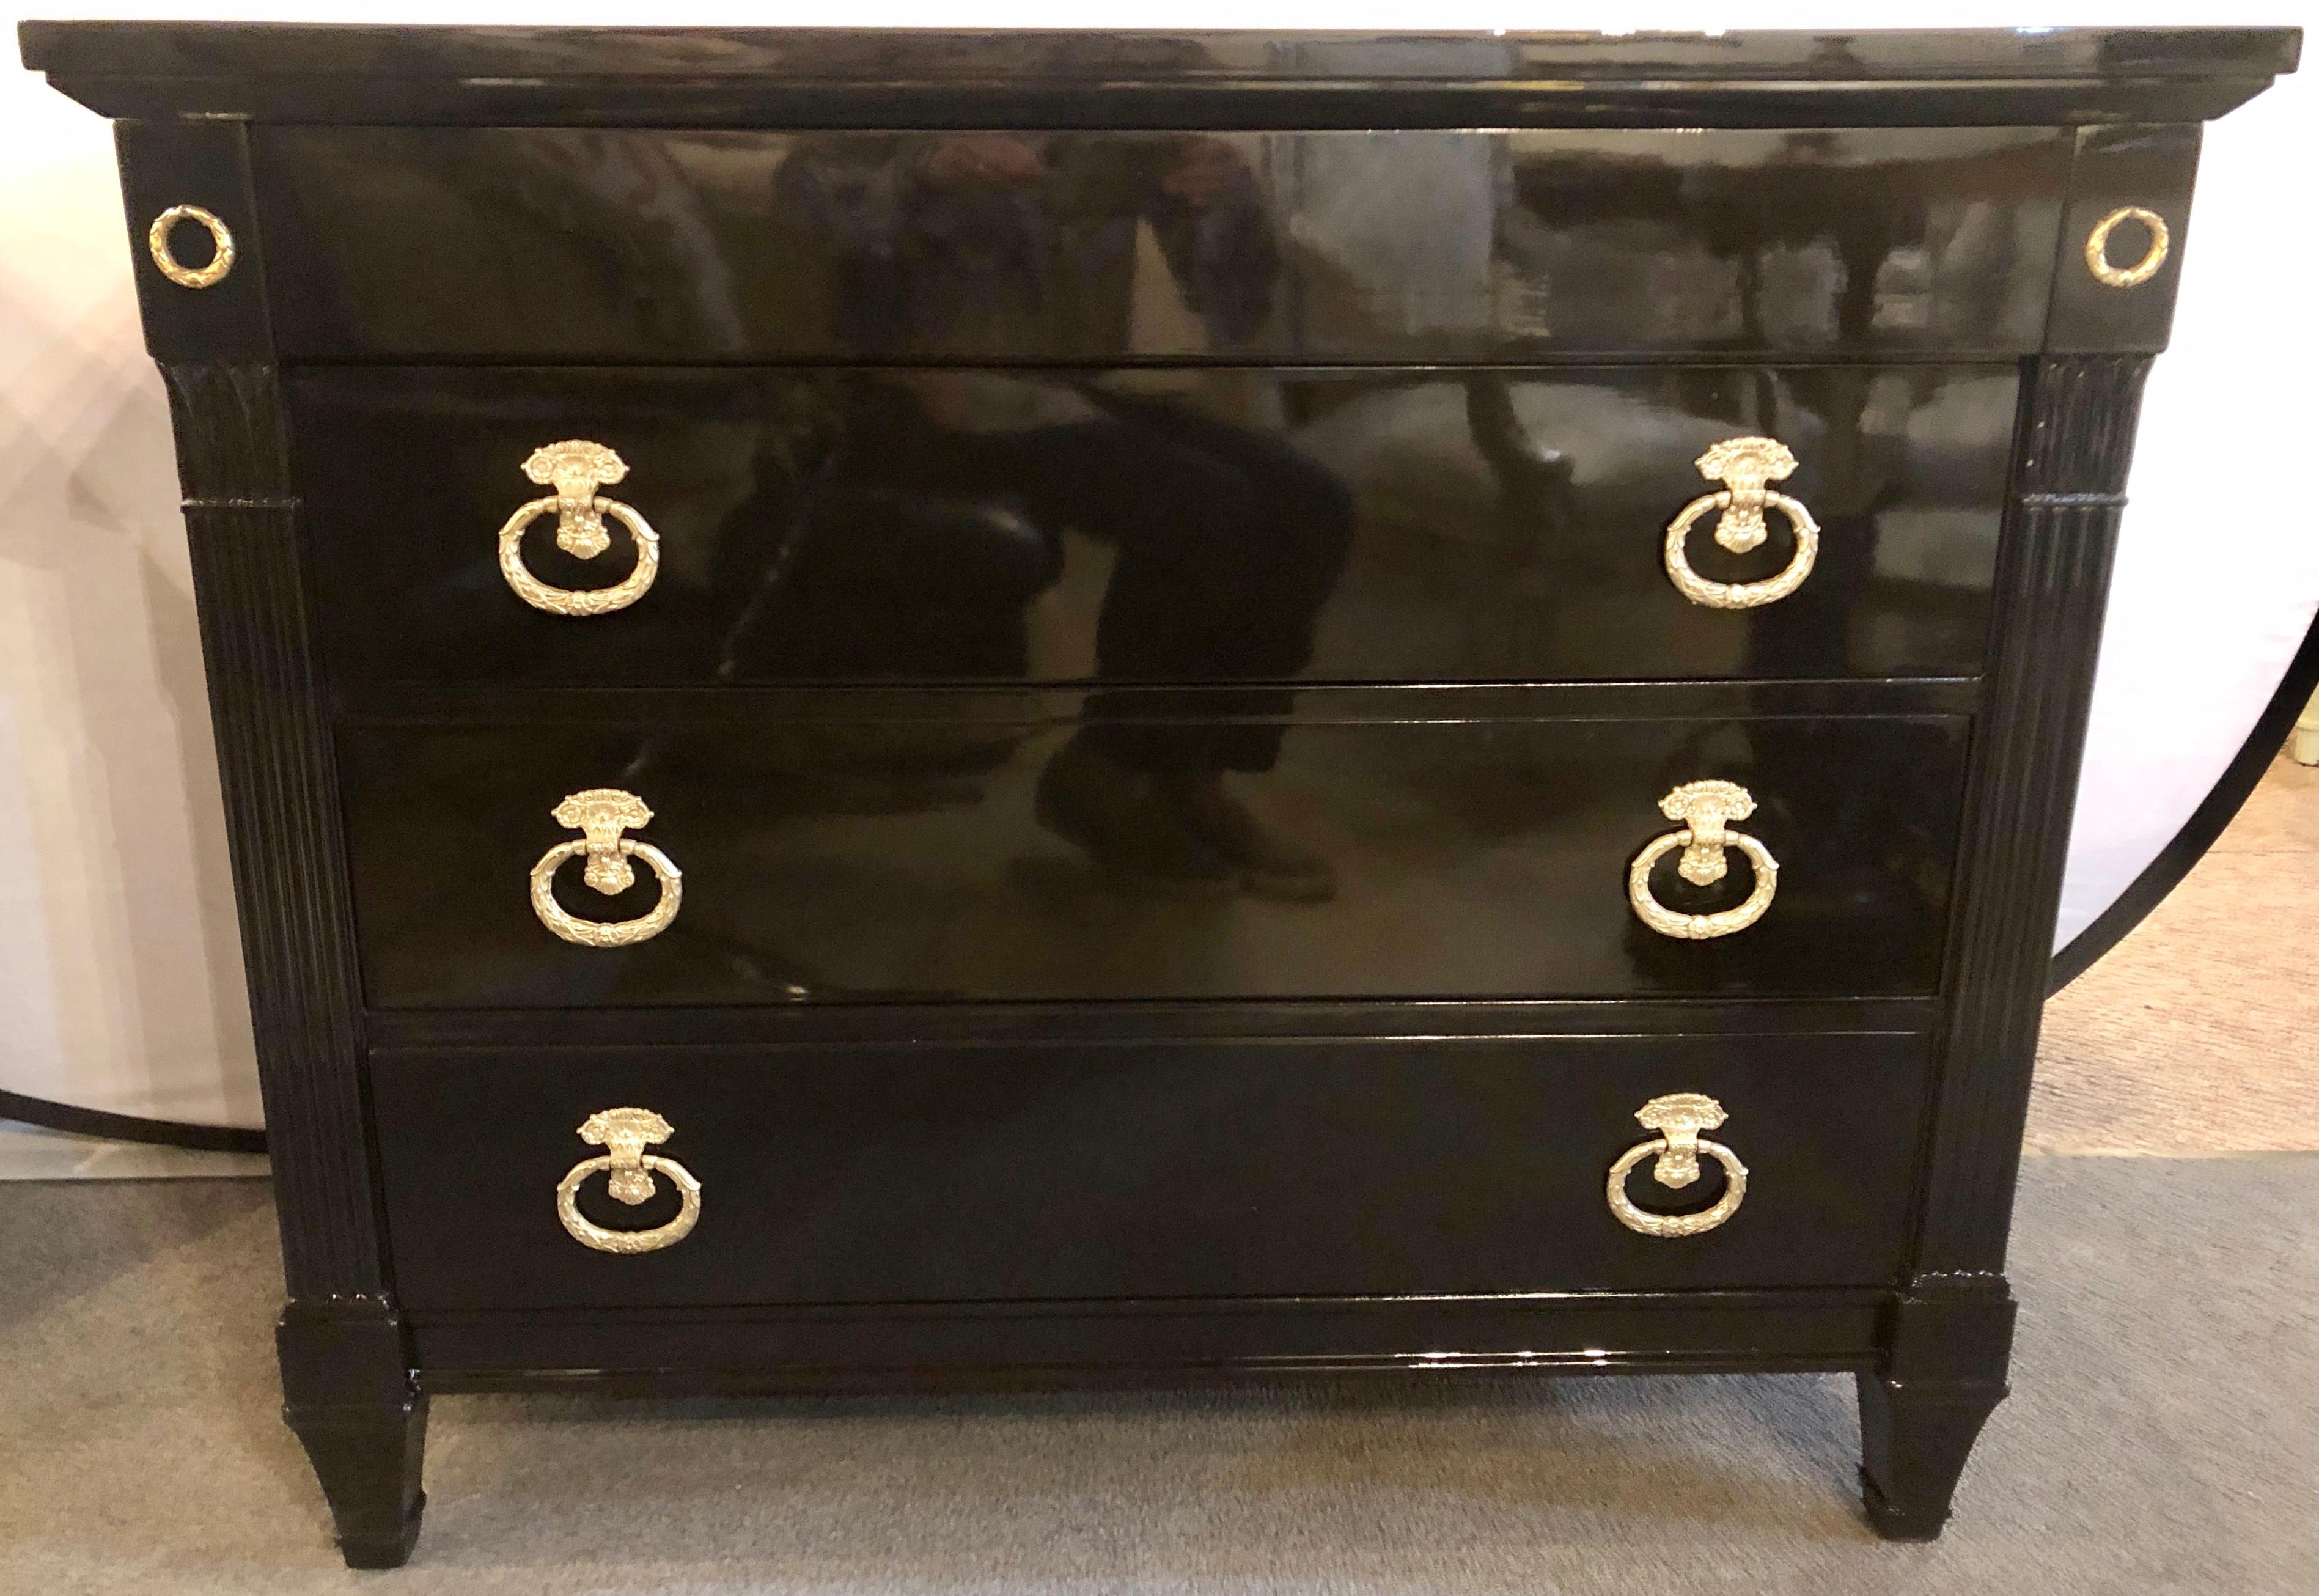 Maison Jansen Style Hollywood Regency Ebony Commodes, Chests or Nightstands. A Pair of the finest finish commodes anyone could ask for. The Steinway finished black lacquered tops supported by a group of four drawers drawers the top with hidden pulls